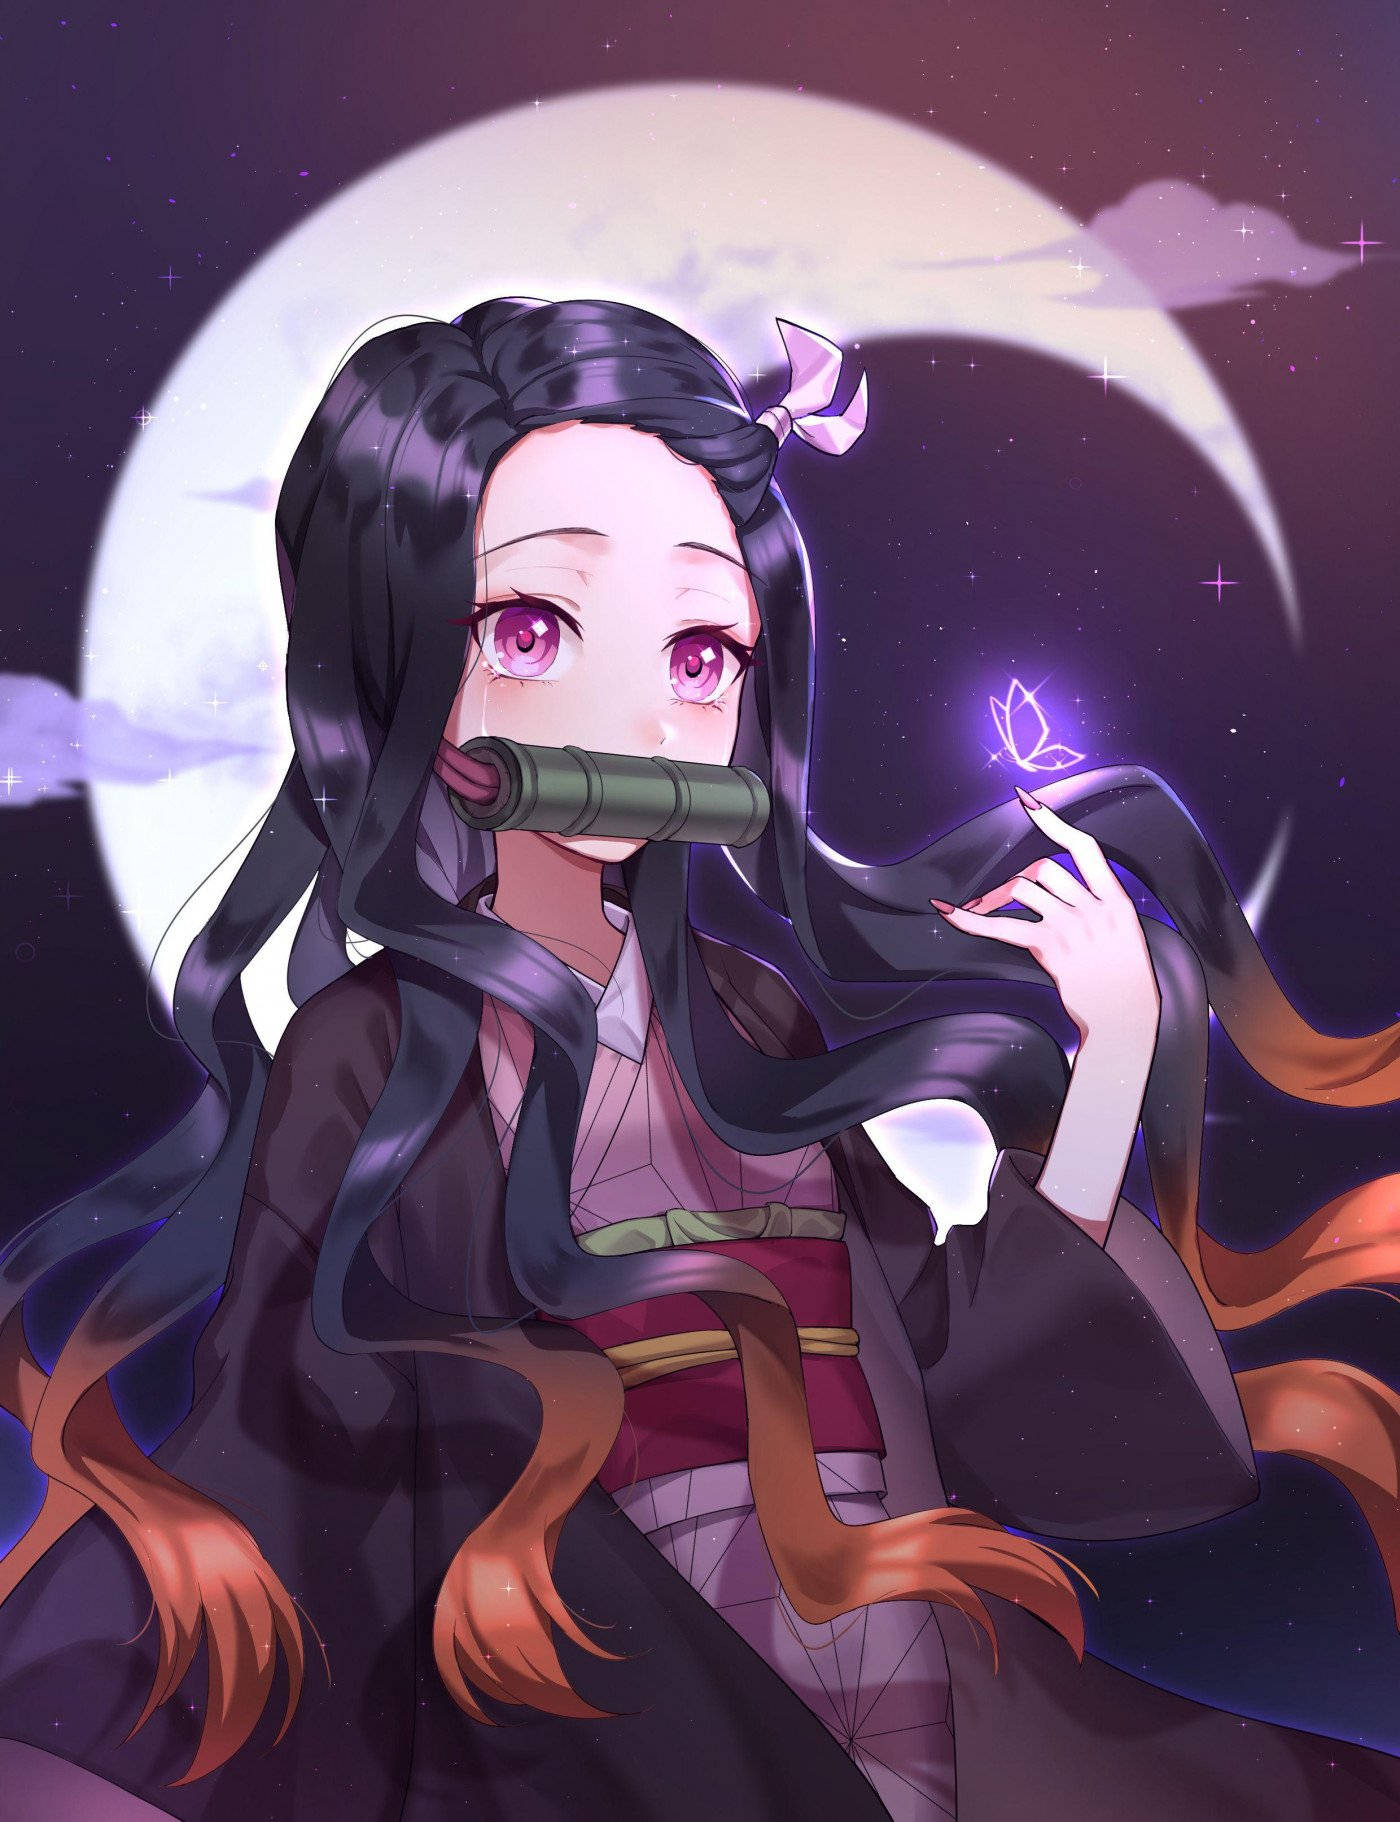 "Be empowered with Nezuko's strength, even when far from home" Wallpaper